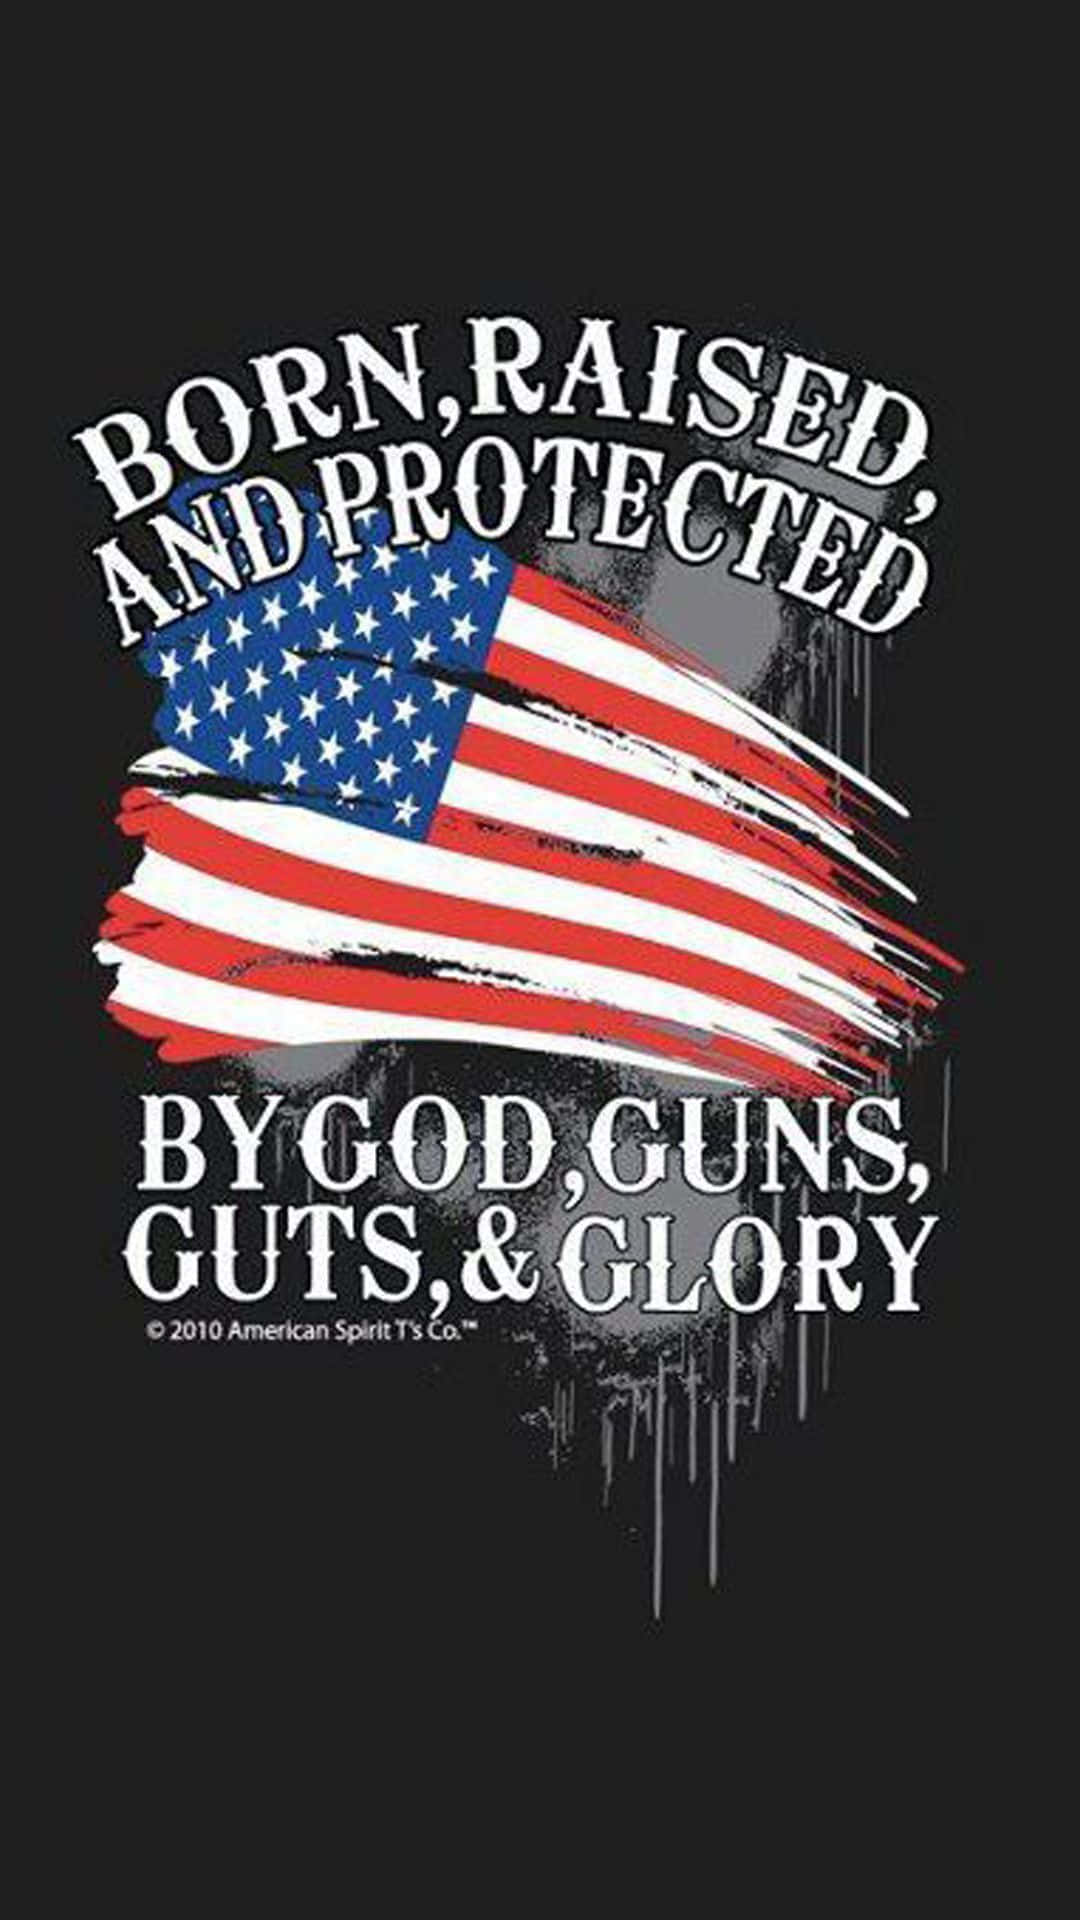 Born, Raised And Protected By God Guns, Guts And Glory T Shirt